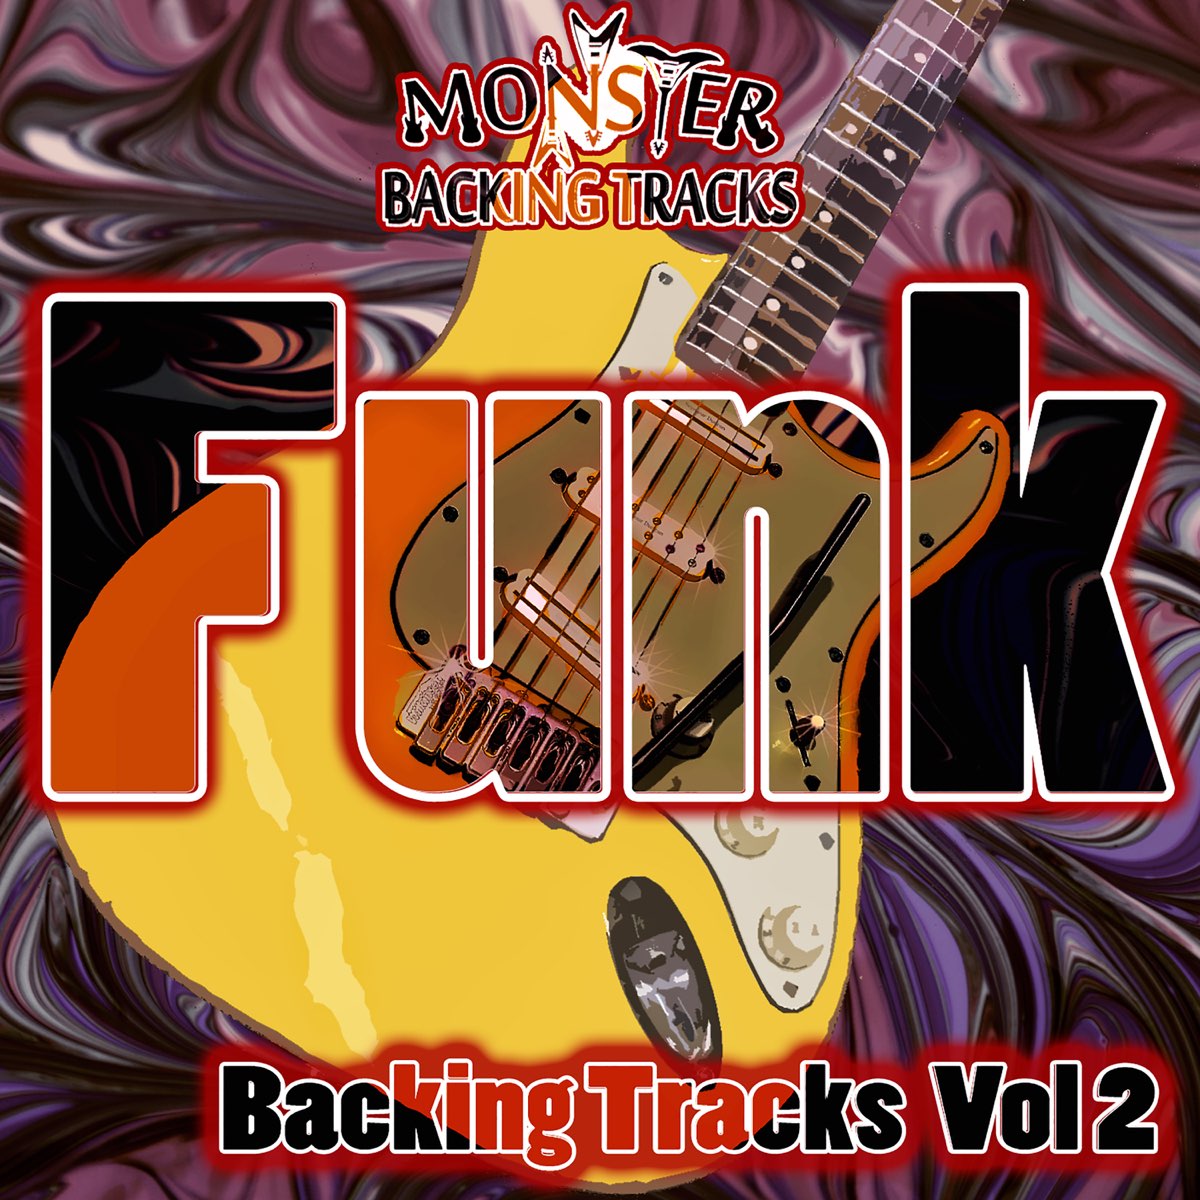 Rock funk tune soul. Фанк альбомы. F#M Backing track. Fm-3 - back to the Funky. Fm-3 , rhades - back to the Funky.